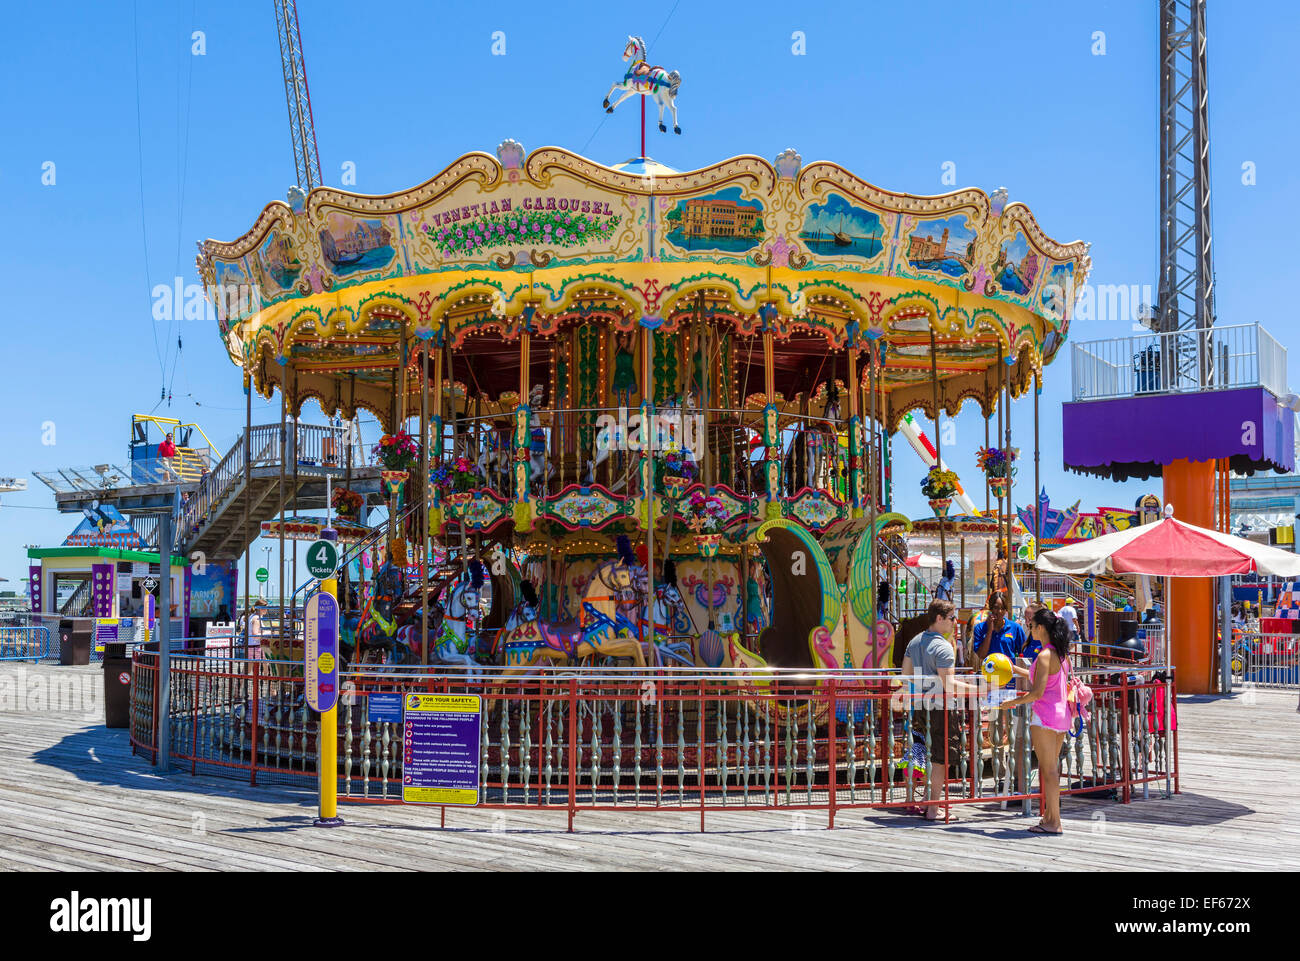 Carousel on Surfside Pier, North Wildwood, Cape May County, New Jersey, USA Stock Photo